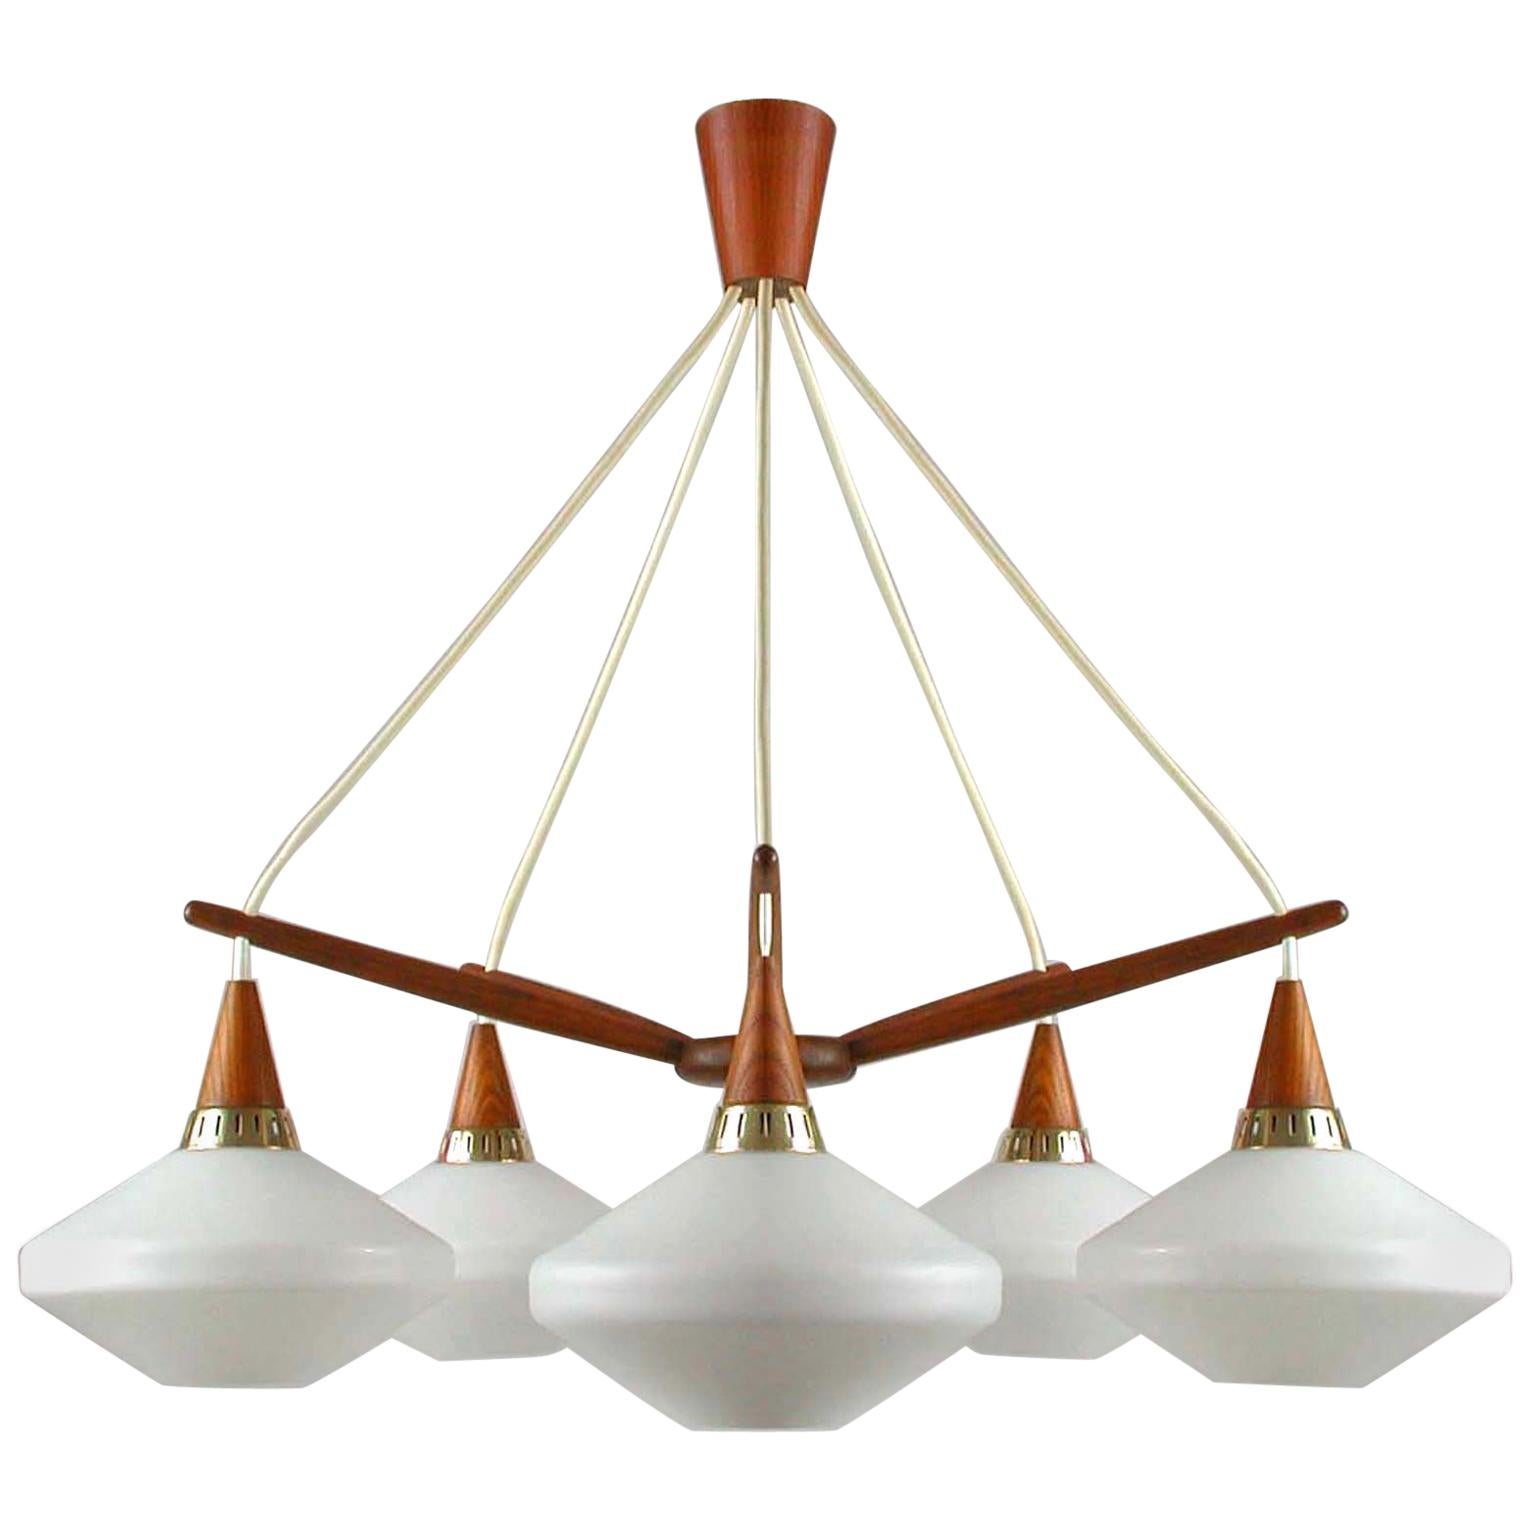 Midcentury Swedish Teak and Satin Glass Chandelier by ASEA, 1960s